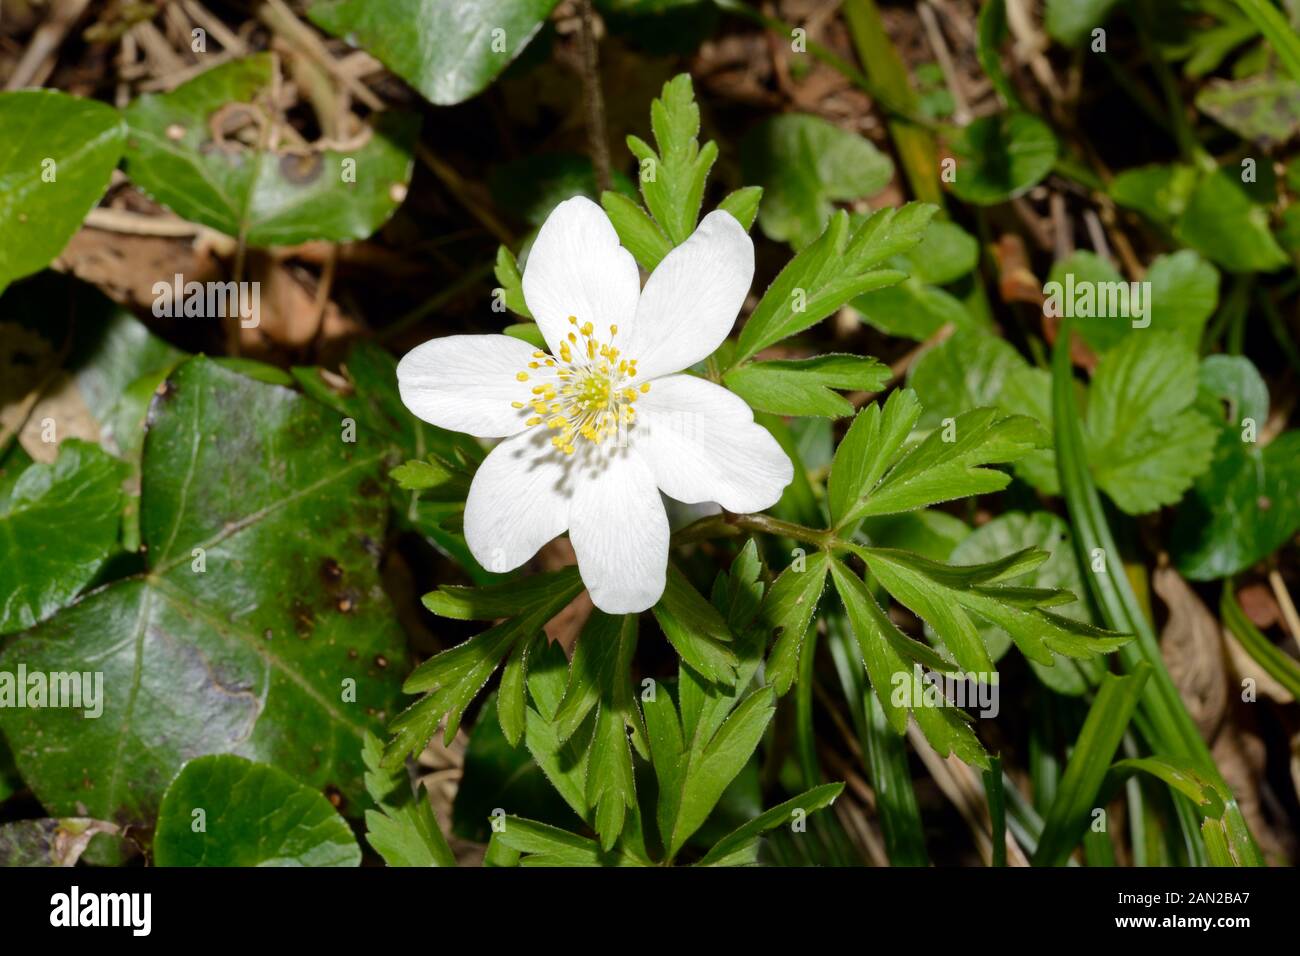 Anemone nemorosa (wood anemone) is native to Europe growing in shady woods, and is an indicator of ancient woodland. Stock Photo